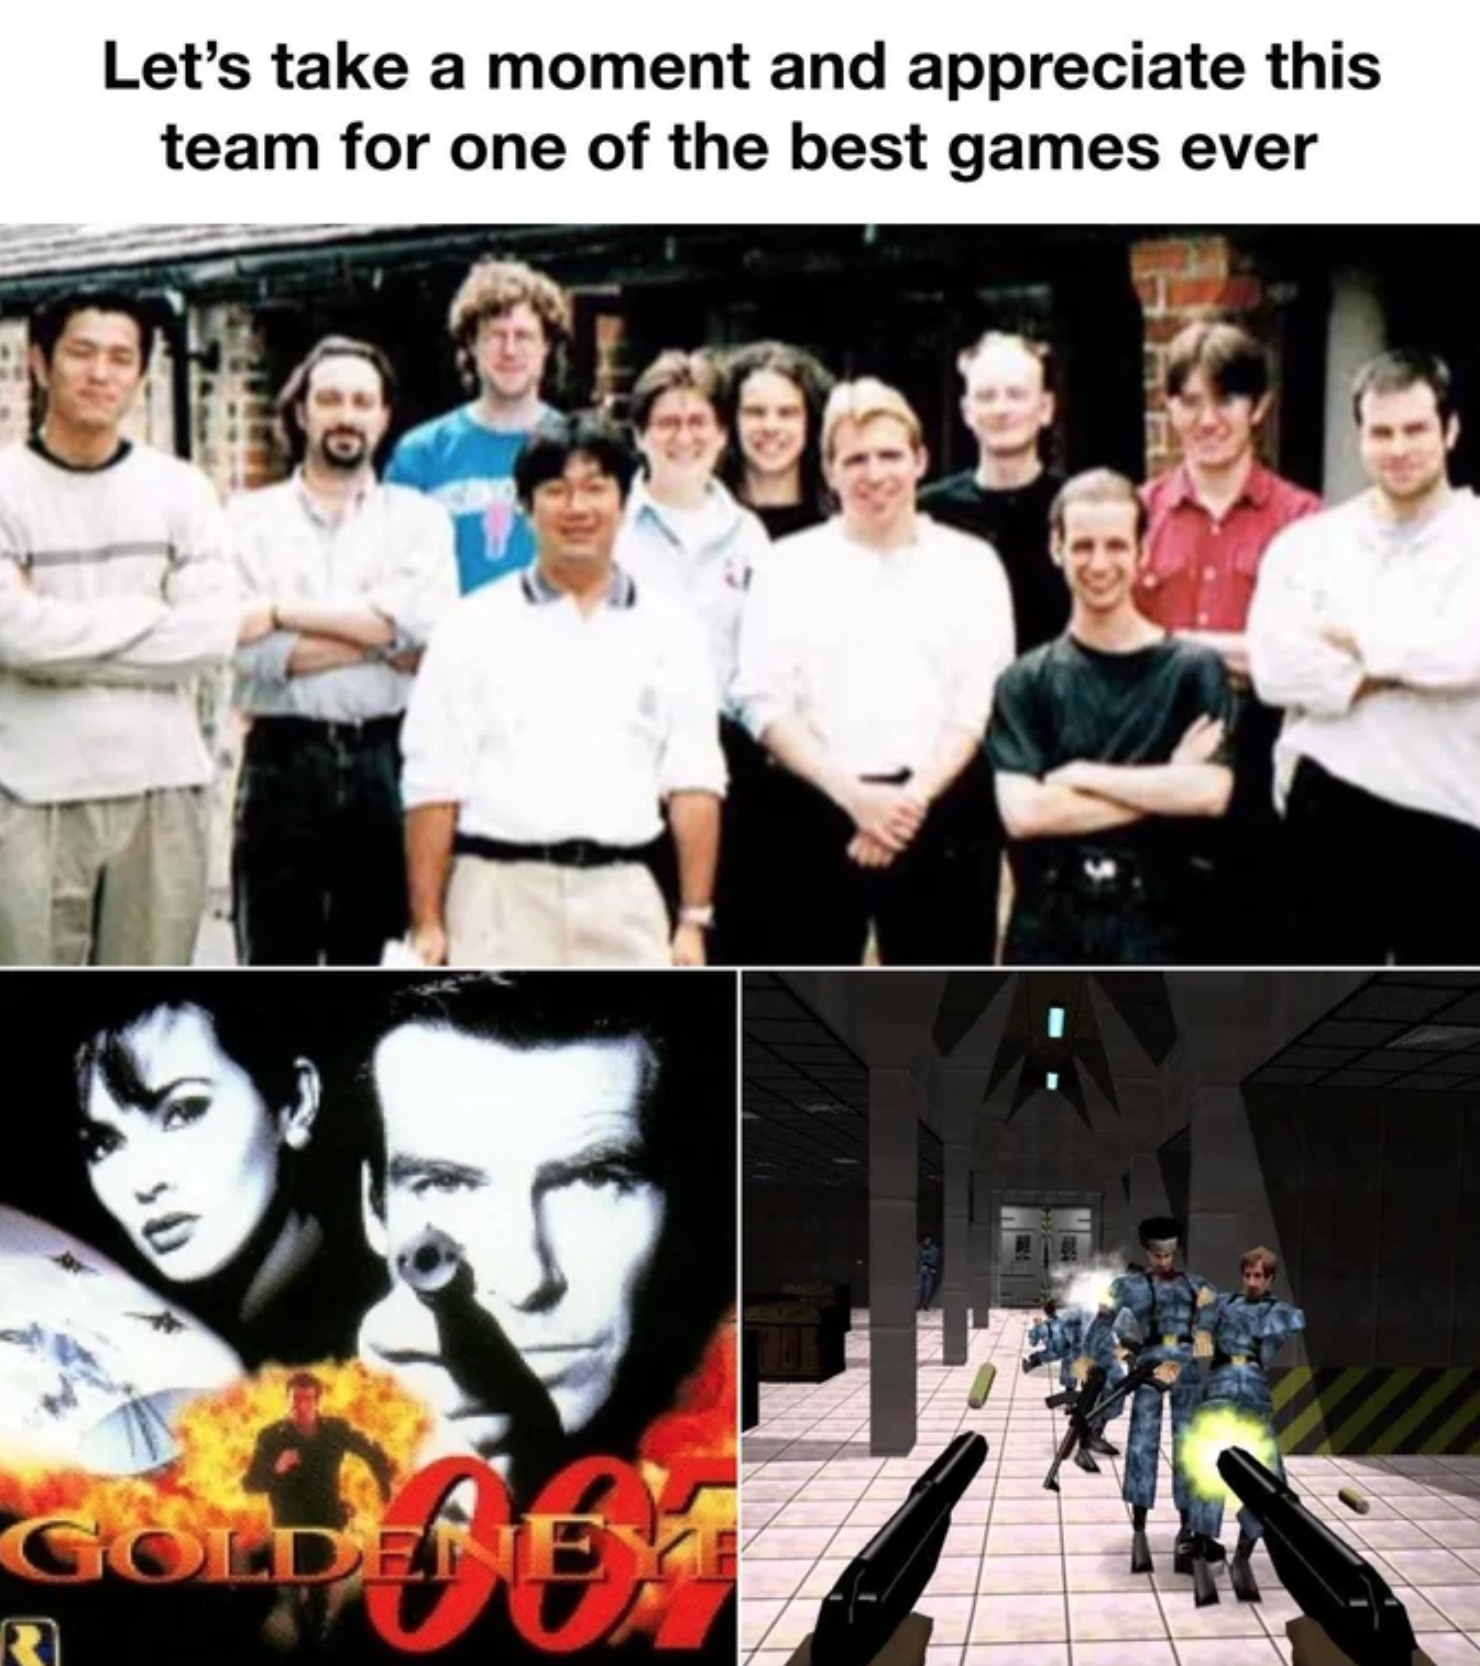 goldeneye 007 development team - Let's take a moment and appreciate this team for one of the best games ever Golder Te